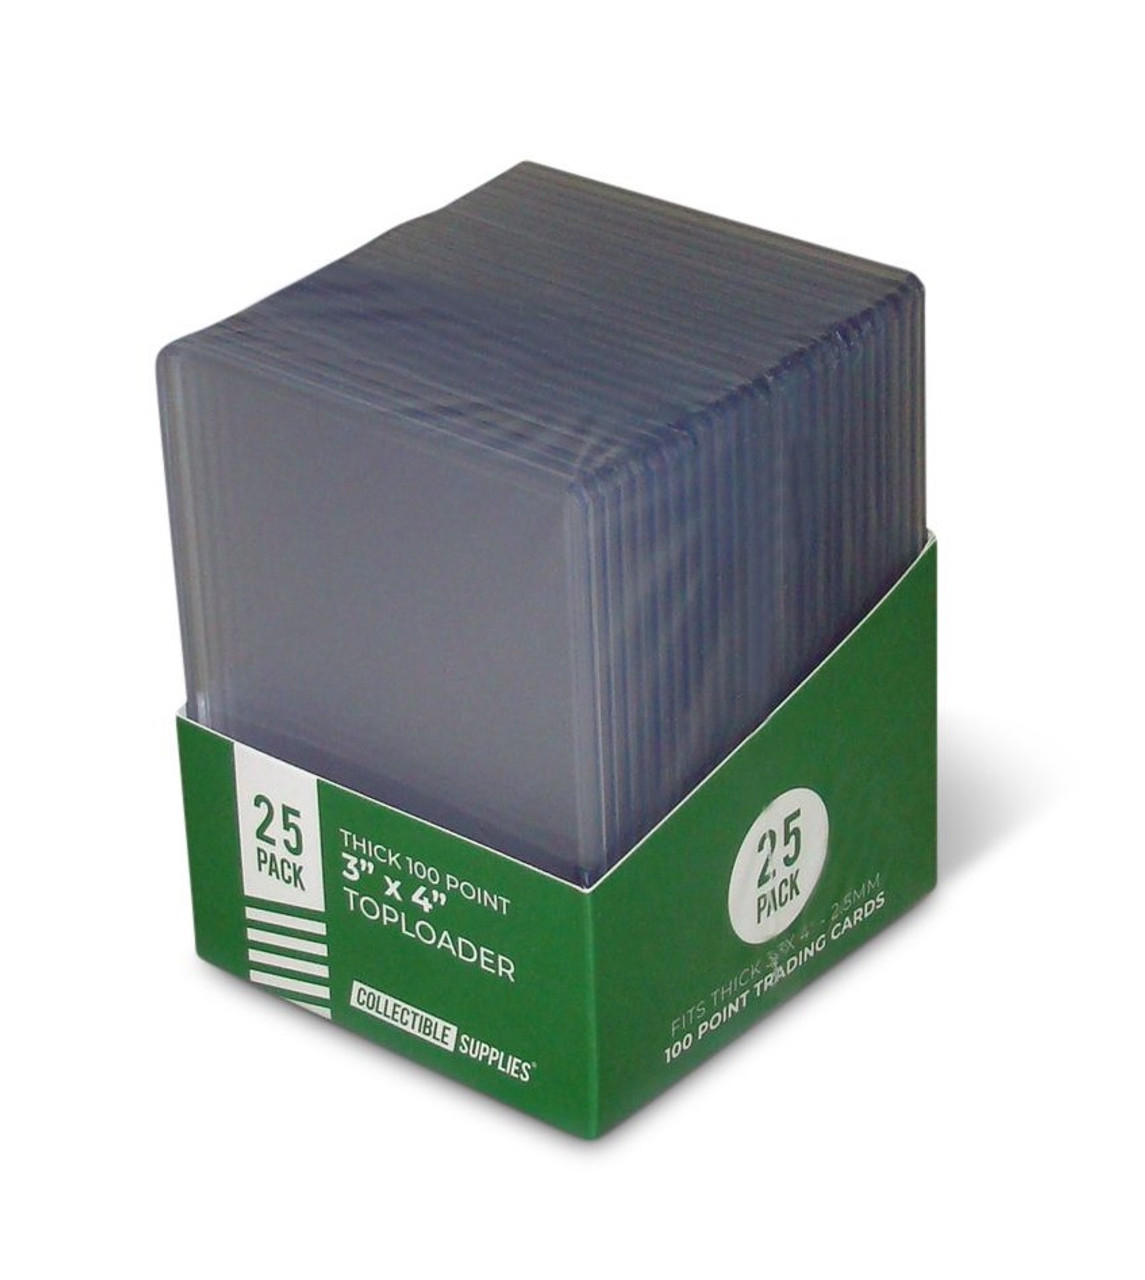 Clear Plastic Box - 4 Square X 4 Tall - 25 Boxes Per Pack